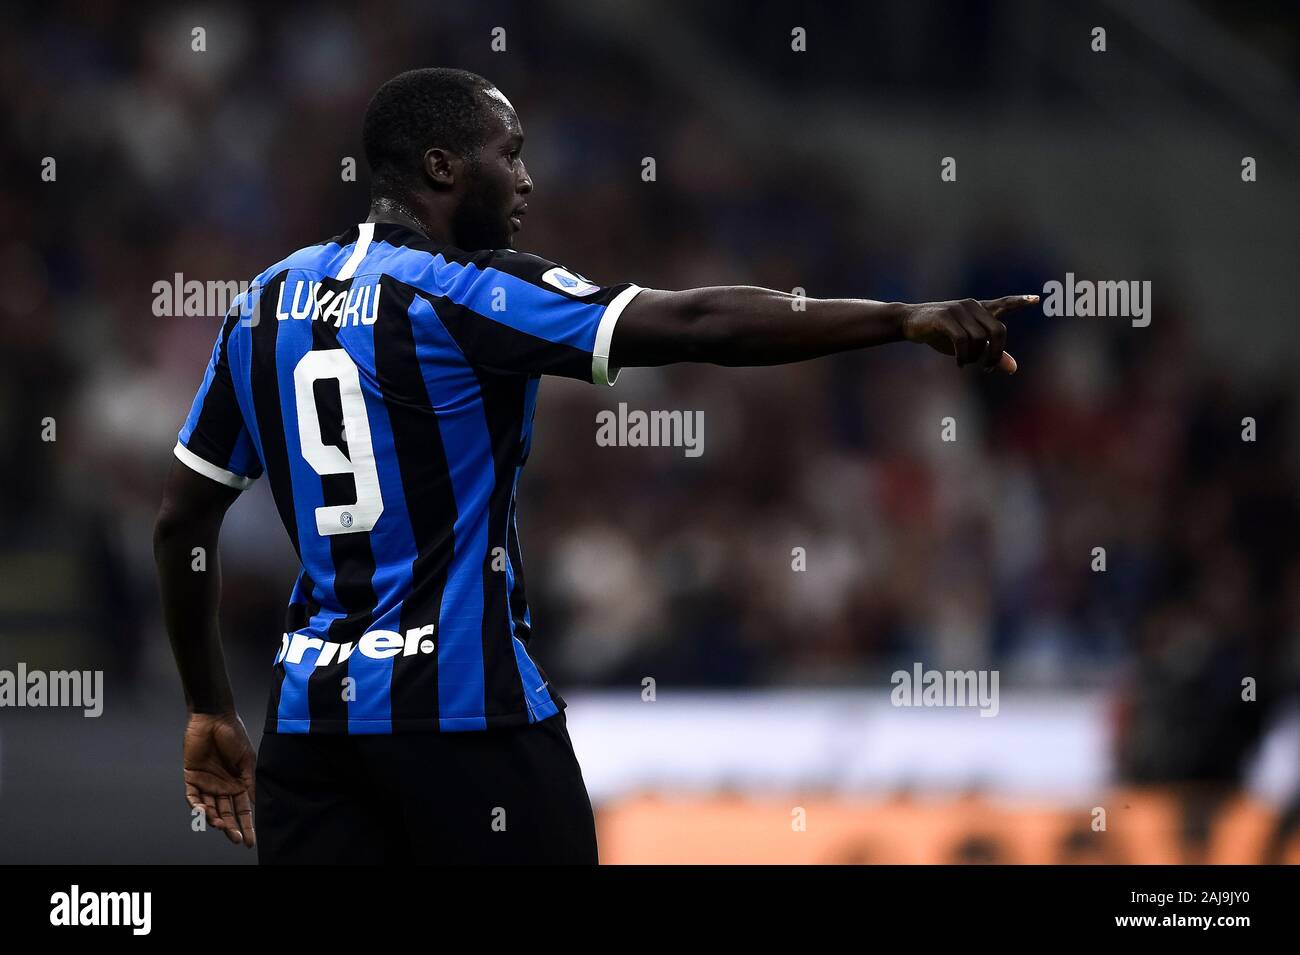 Milan, Italy. 14 September, 2019: Romelu Lukaku of FC Internazionale gestures during the Serie A football match between FC Internazionale and Udinese Calcio. FC Internazionale won 1-0 over Udinese Calcio. Credit: Nicolò Campo/Alamy Live News Stock Photo